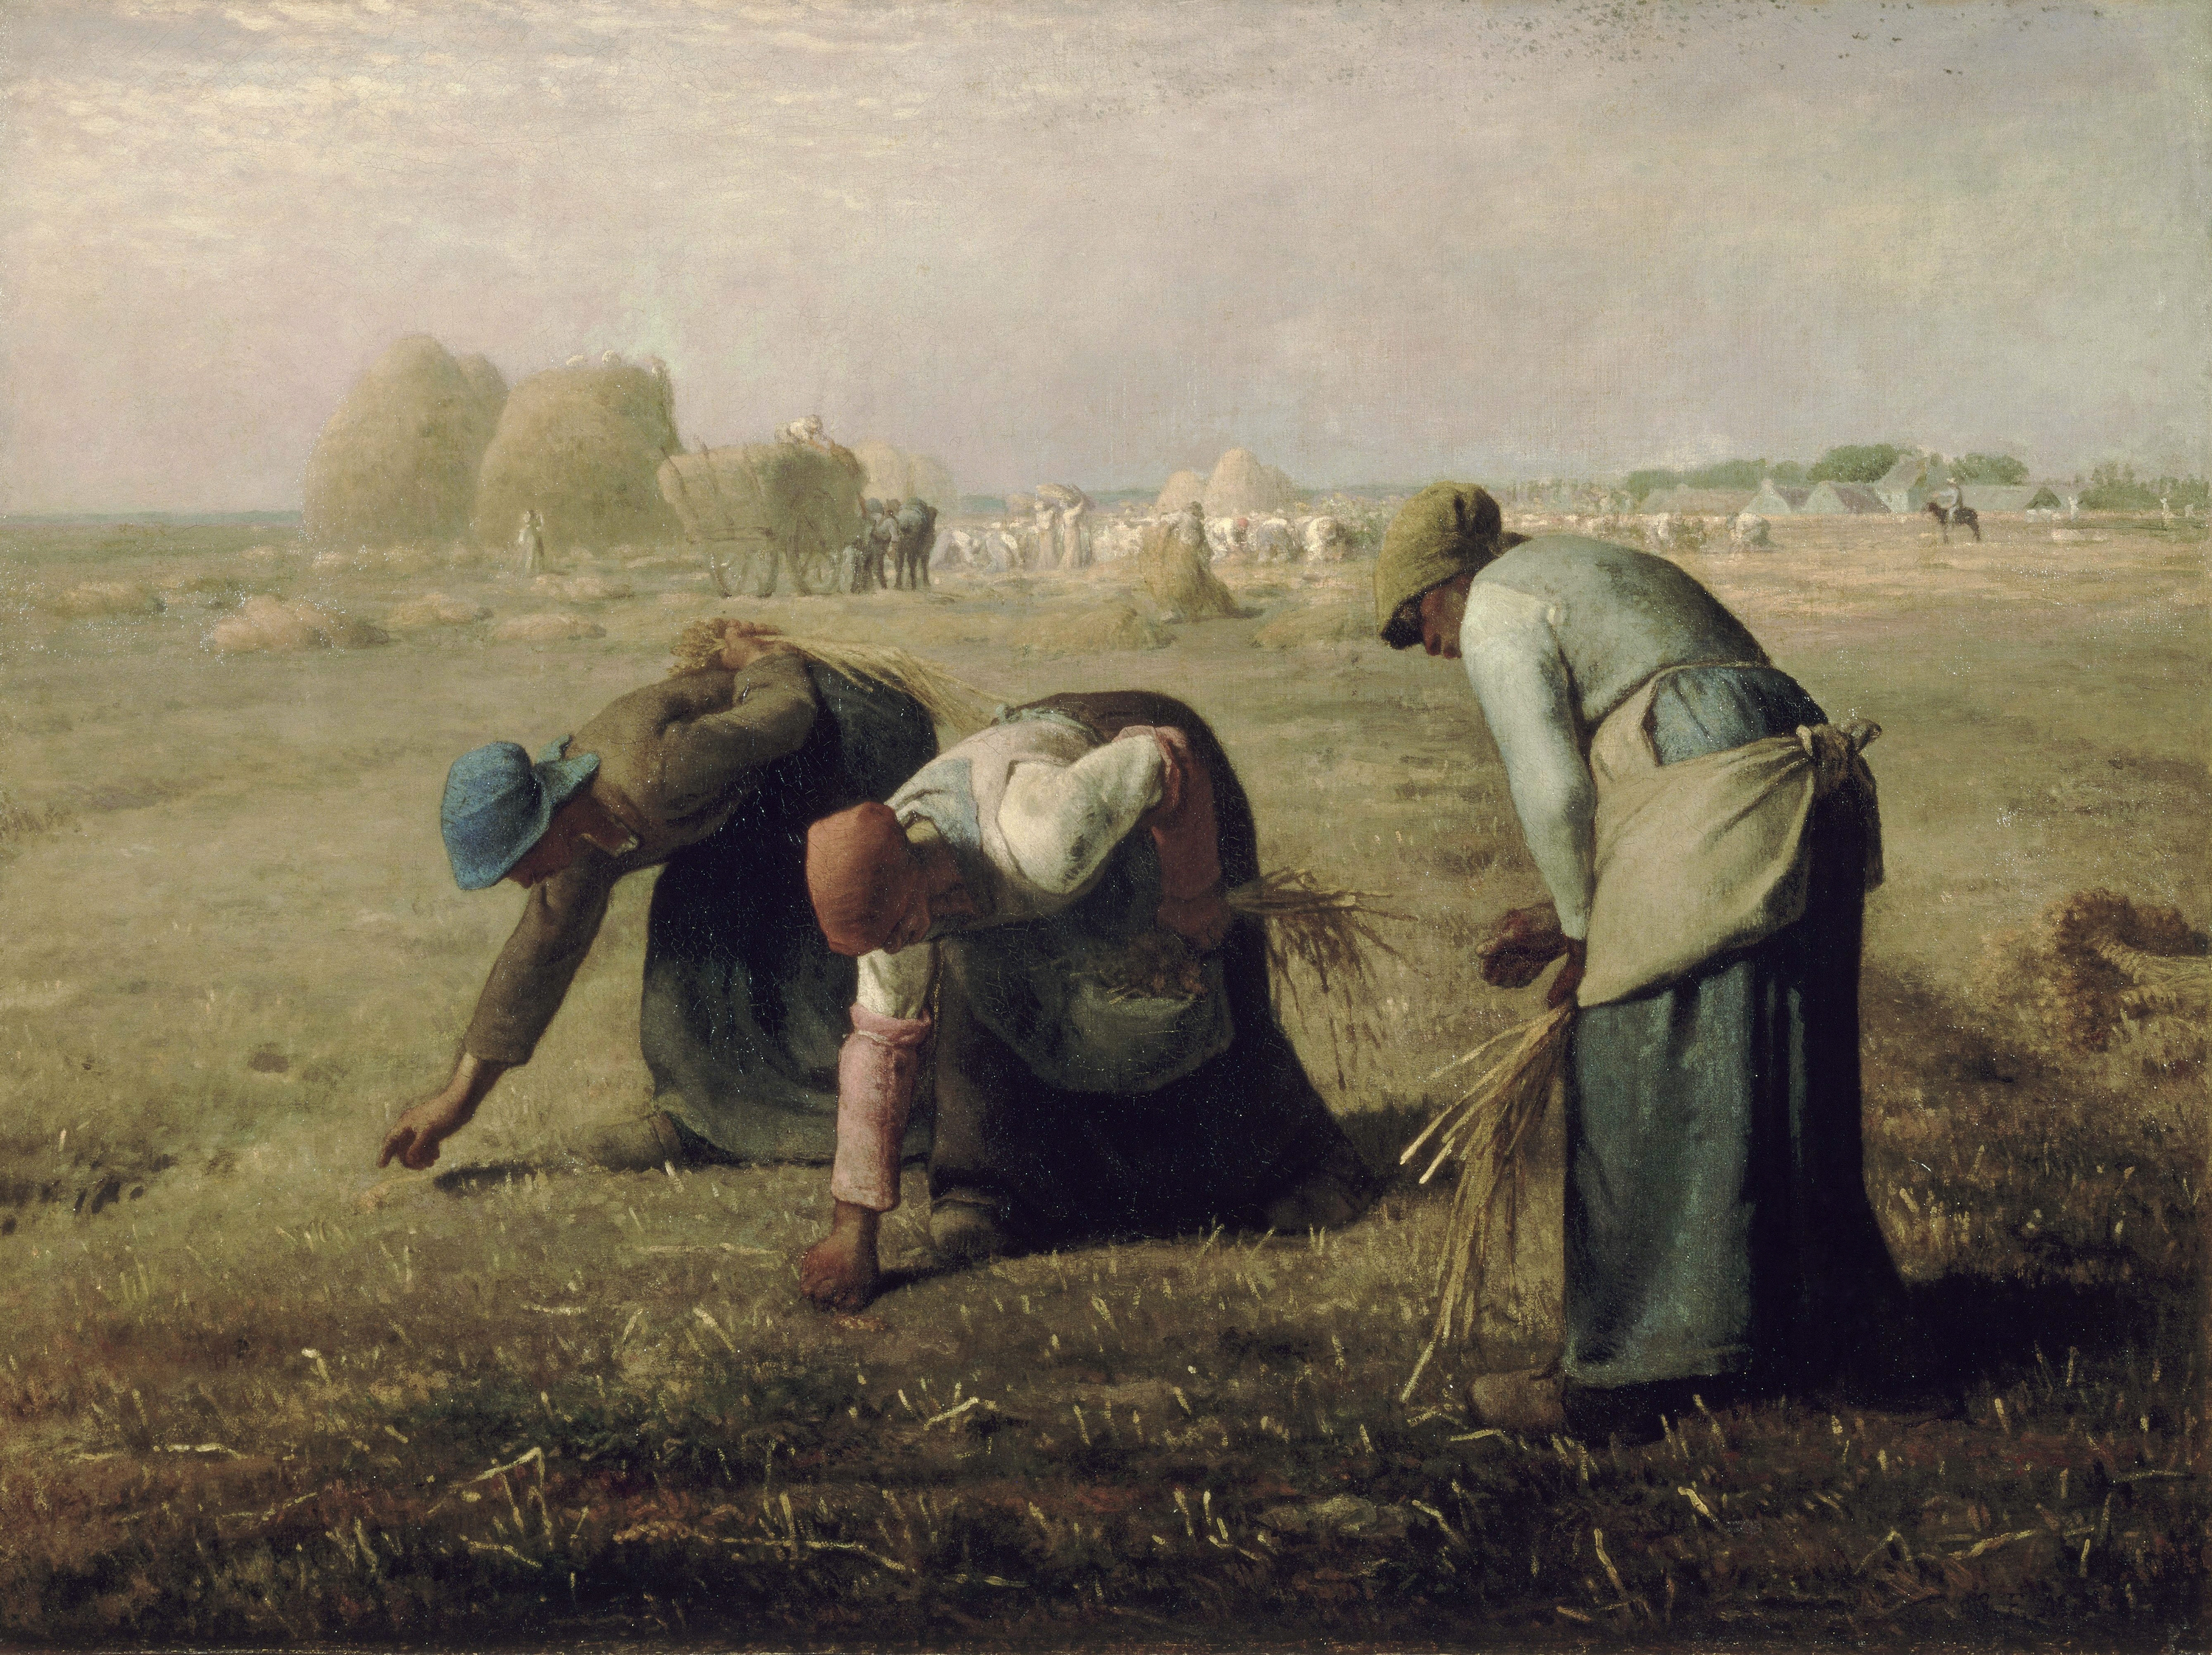 The Gleaners by Jean-François Millet - 1857 - 83,8 × 111,8 cm 